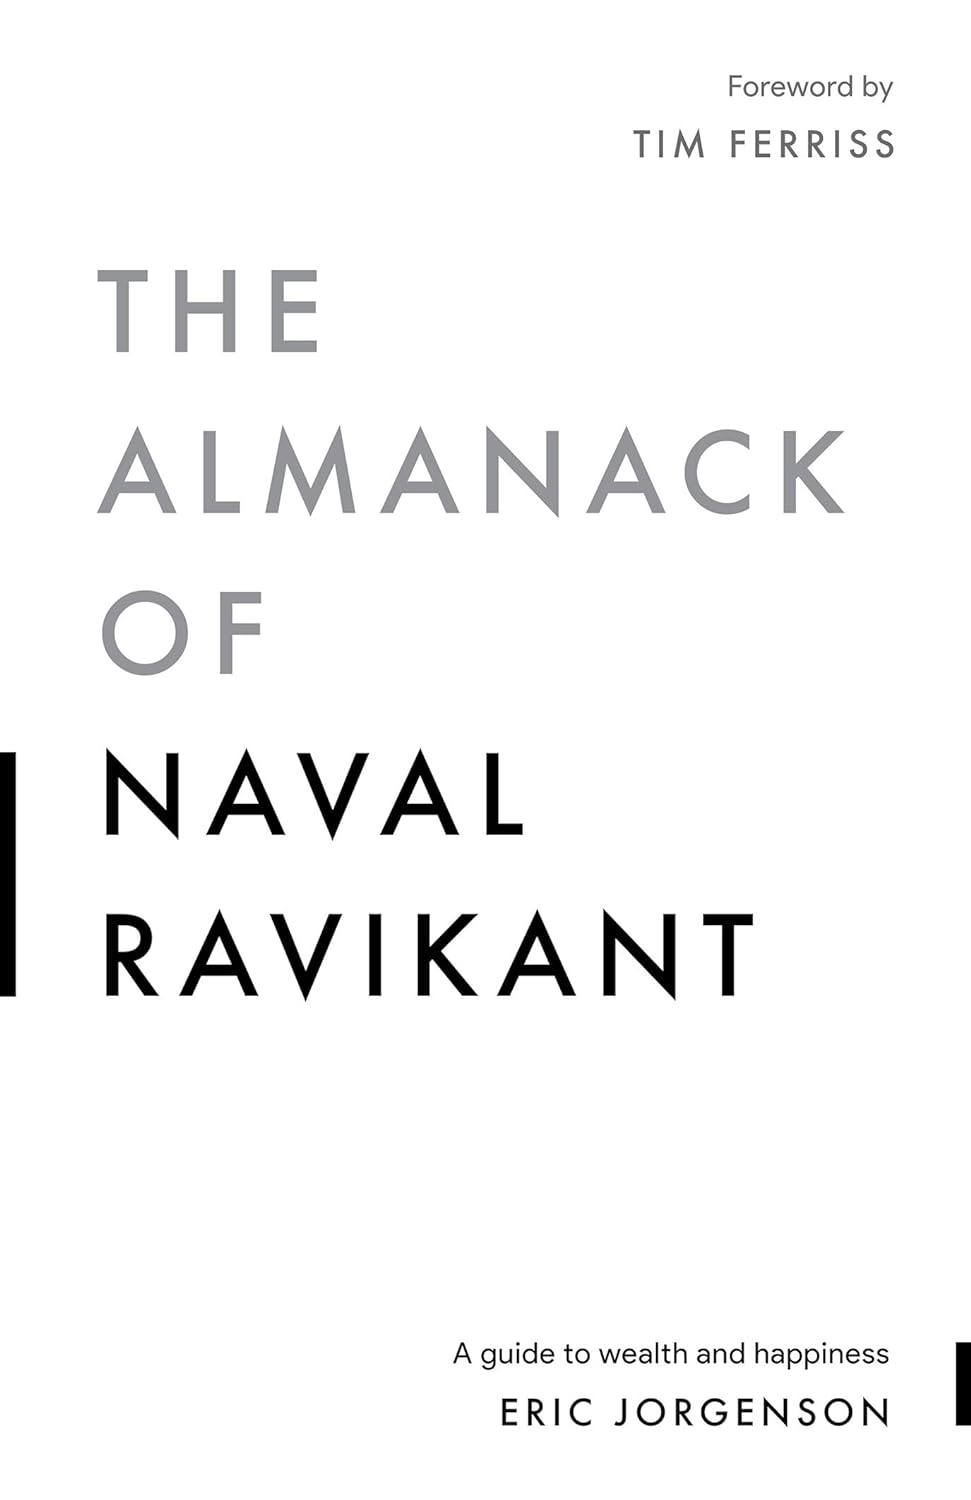 The Almanack of Naval Ravikant: A Guide to Wealth and Happiness. Зображення: Amazon